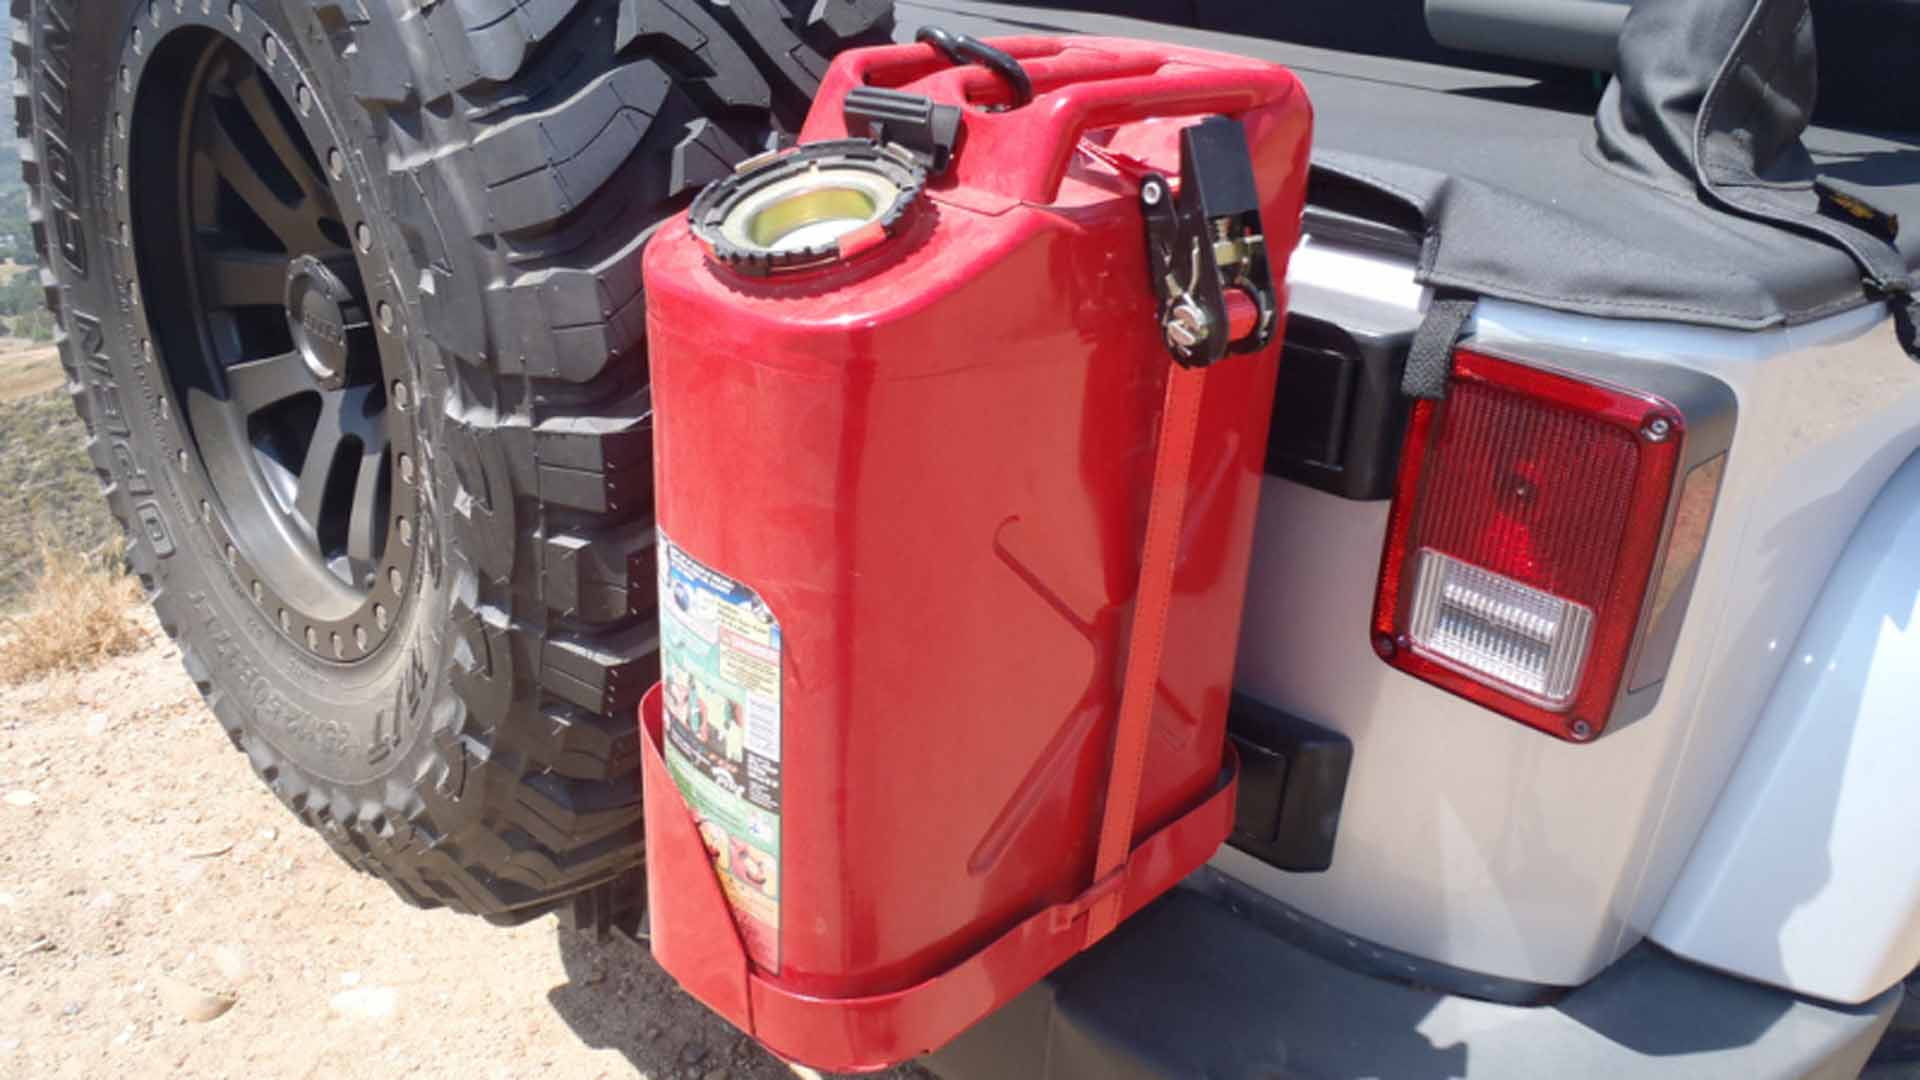 Jeep Wrangler JK: How to Make Your Own Jerry Can Mount | Jk-forum